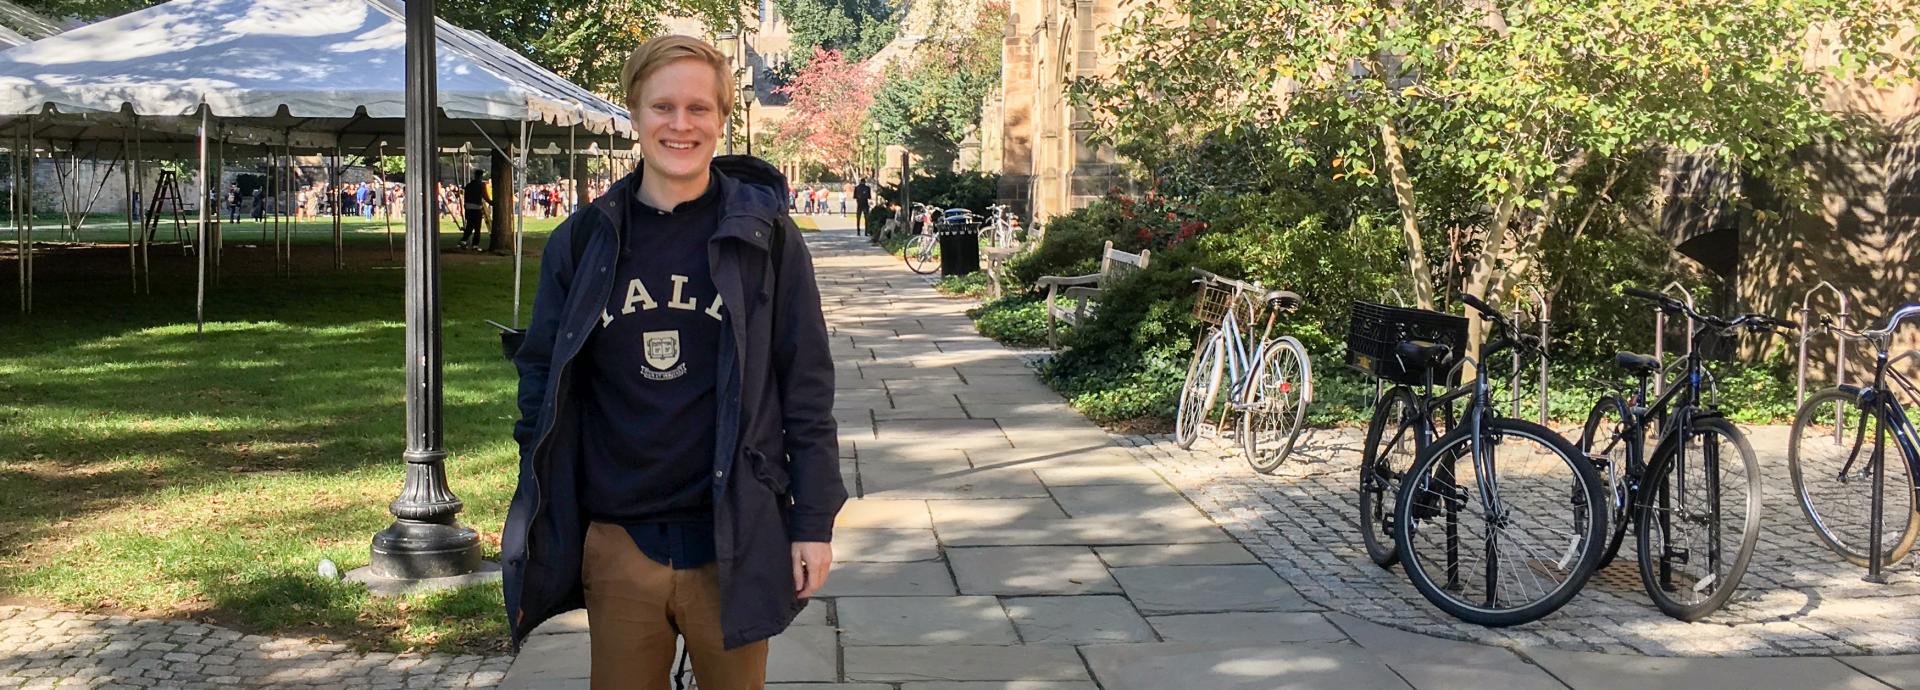 Fulbright Finland alum Tuomas Lihr on Yale campus on a sunny fall day